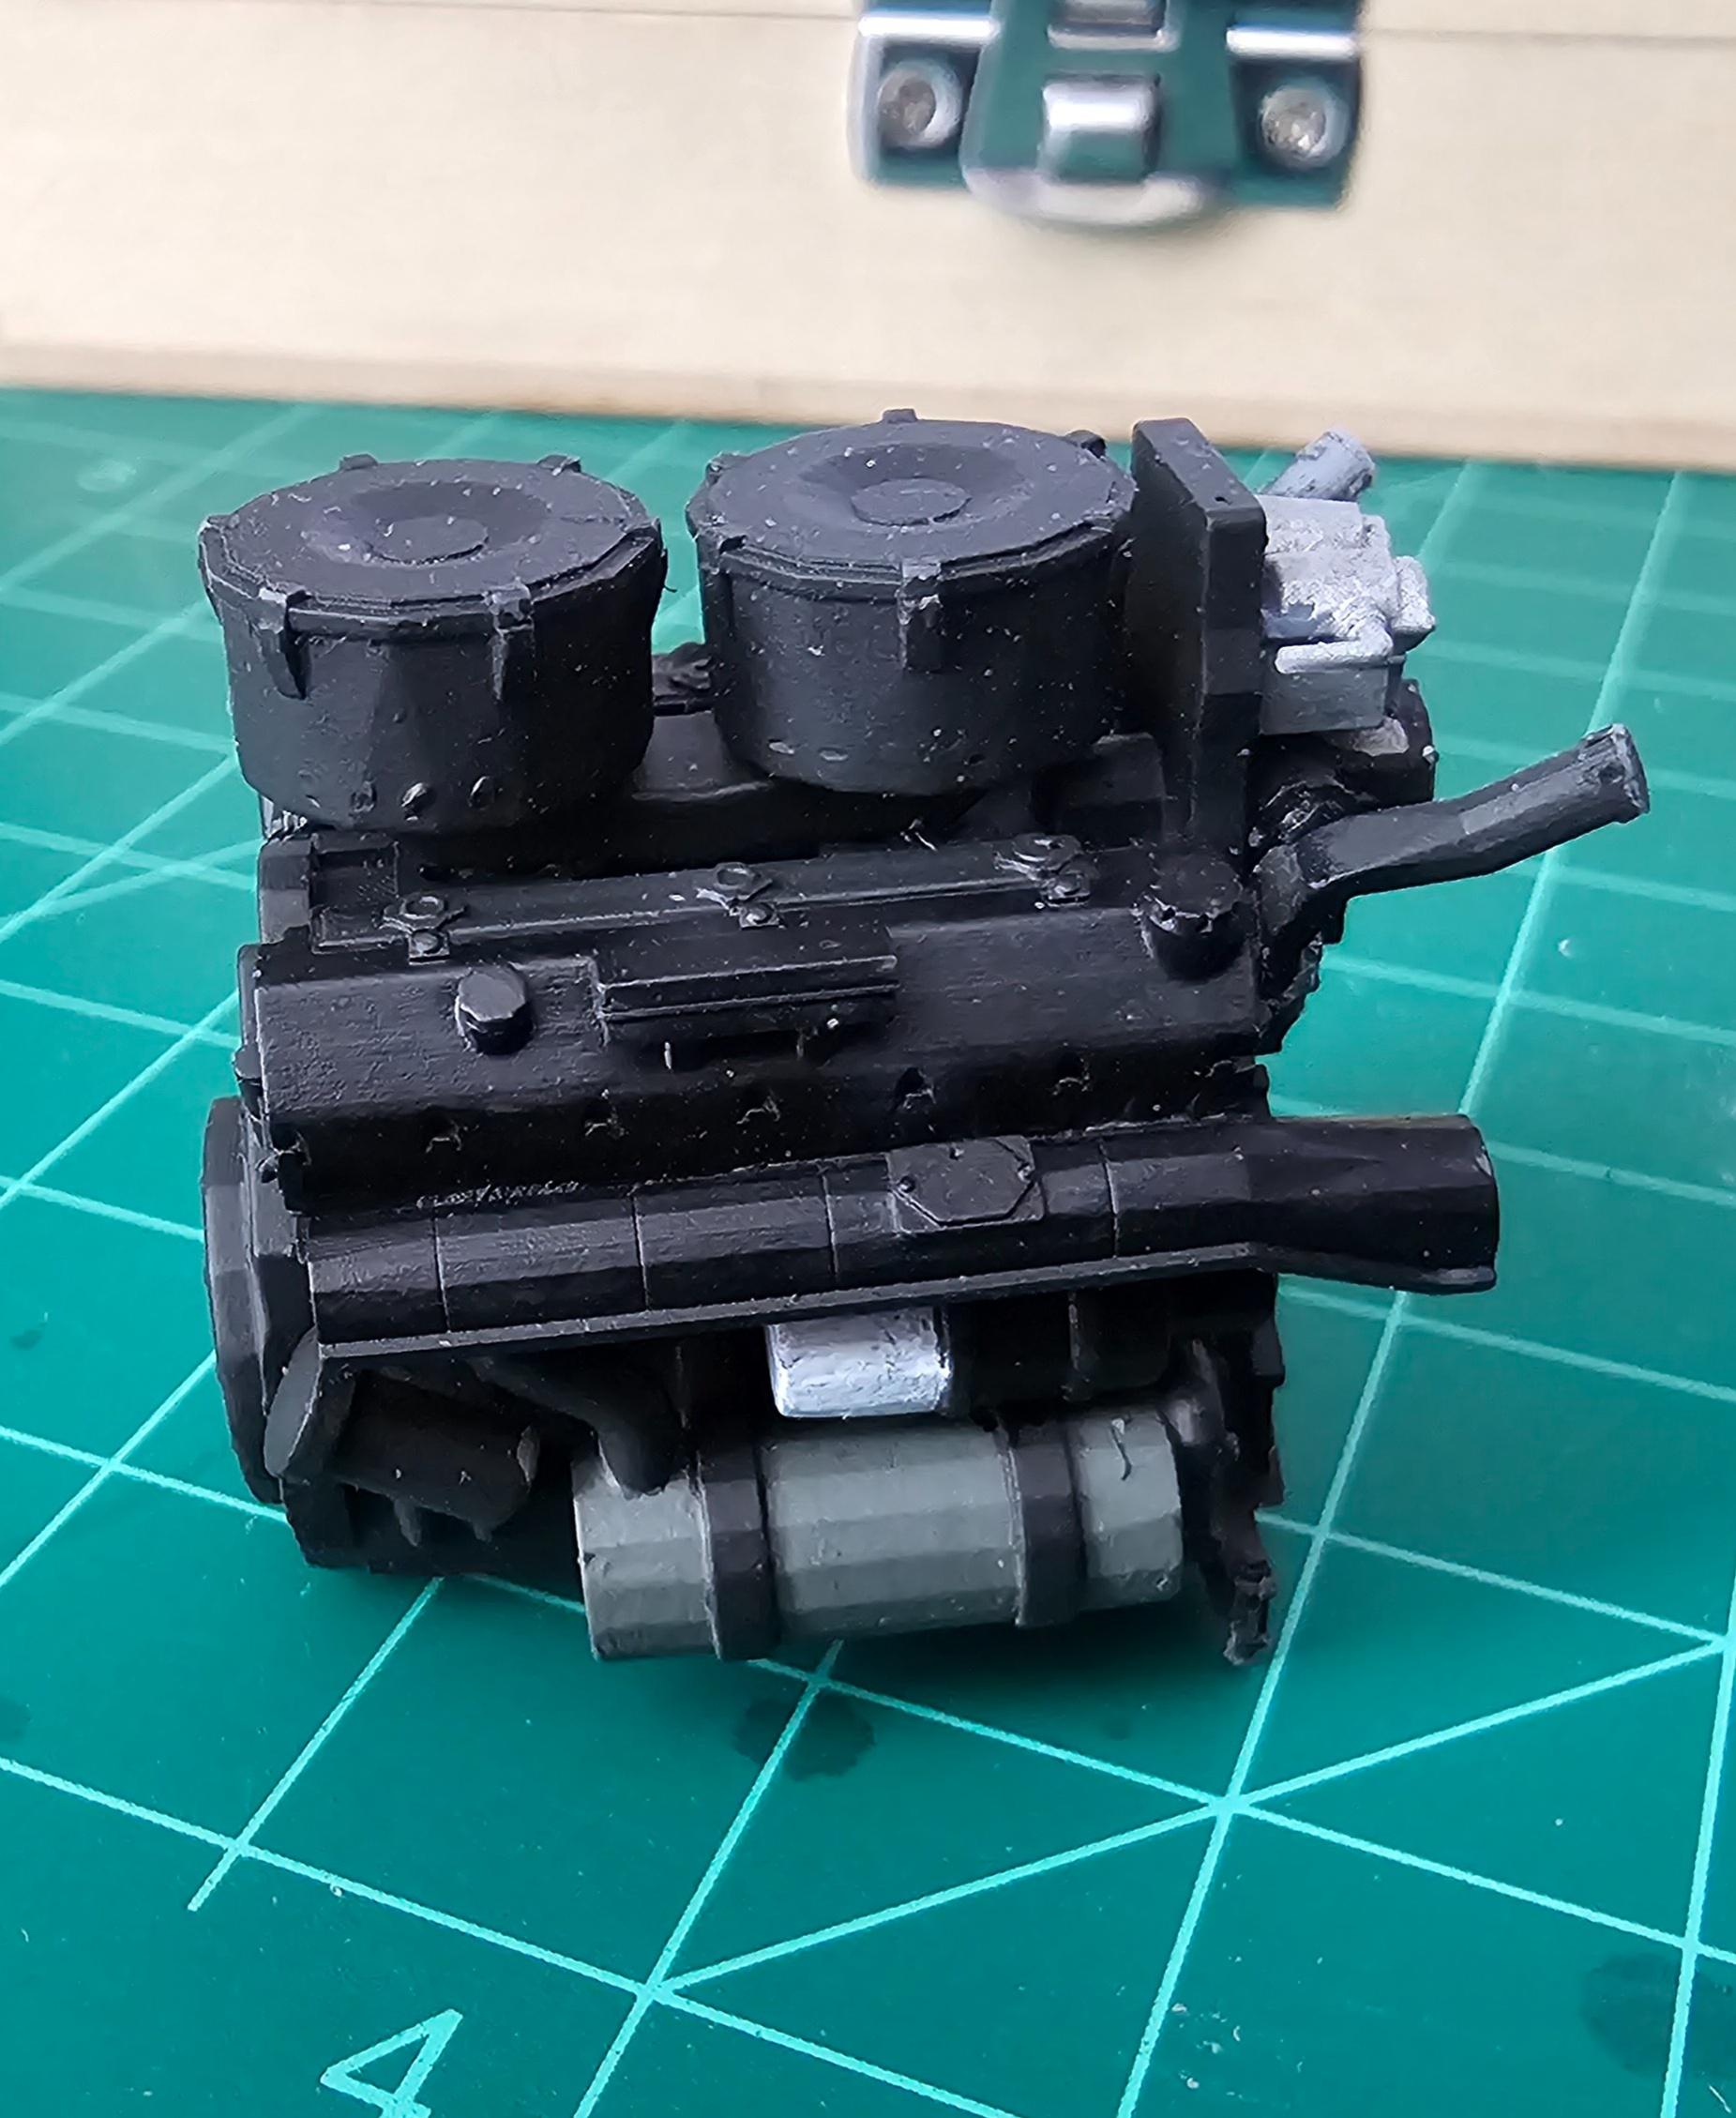 V8 Tiger Engine - Nice model, lots of details.

mine printed out with visible polygons. Don't know why or how to correct - 3d model